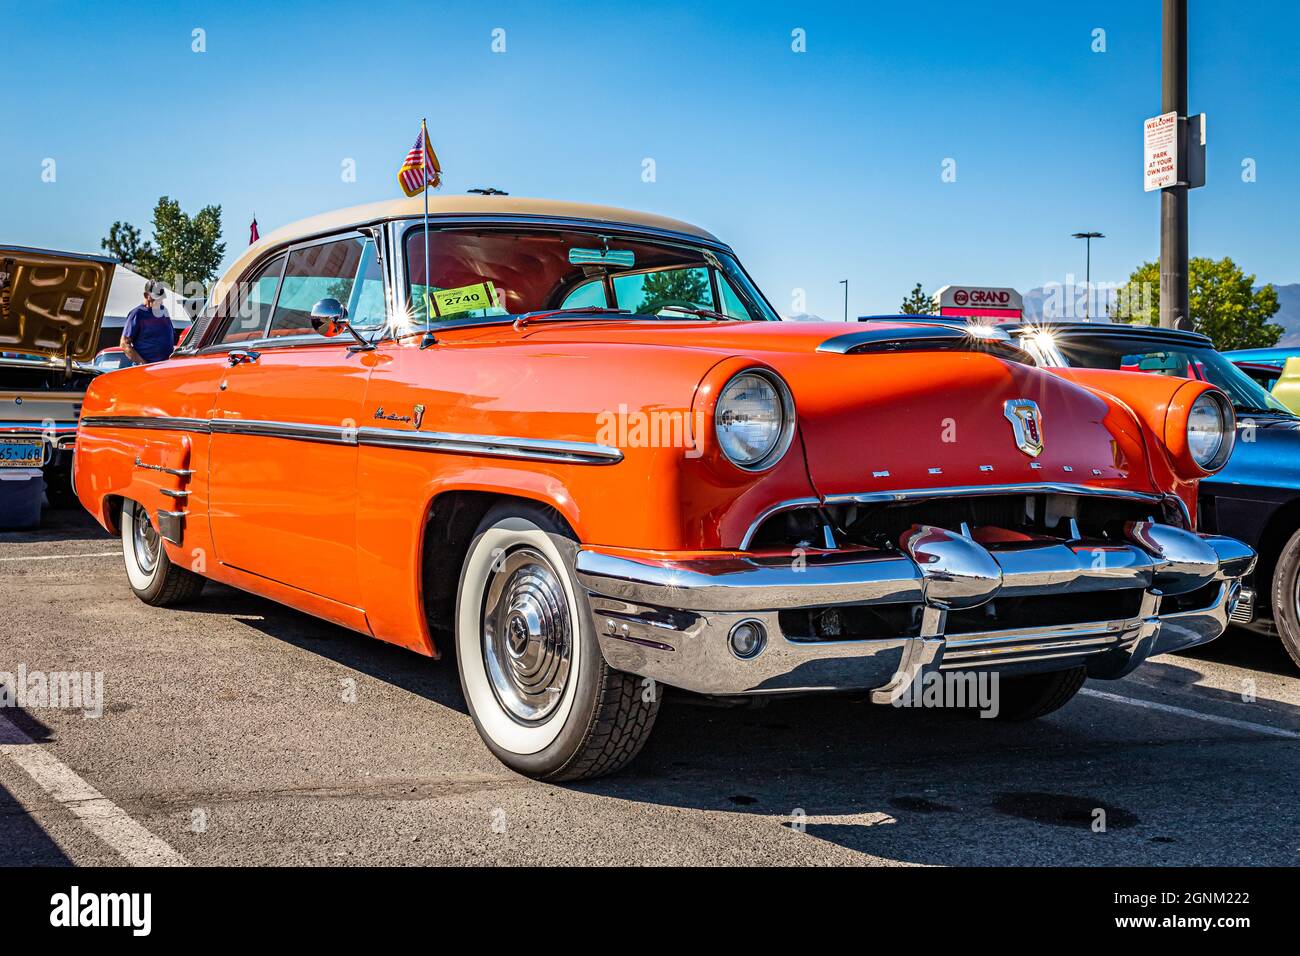 Reno, NV - August 4, 2021: 1953 Mercury Monterey hardtop coupe at a local car show. Stock Photo